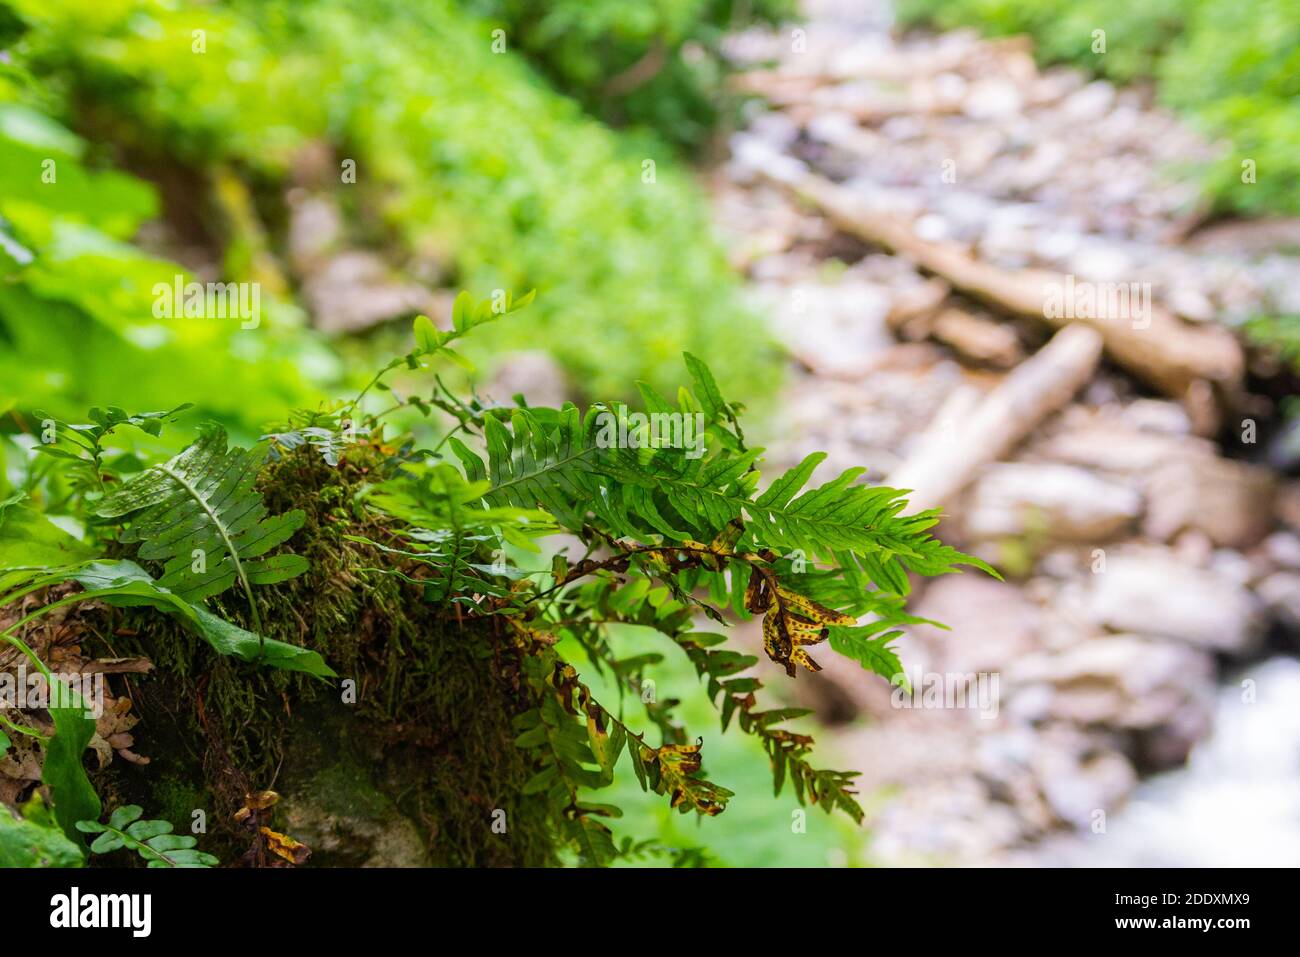 In the wild, ferns of Asplenium scolopendrium grow in the forest. Stock Photo